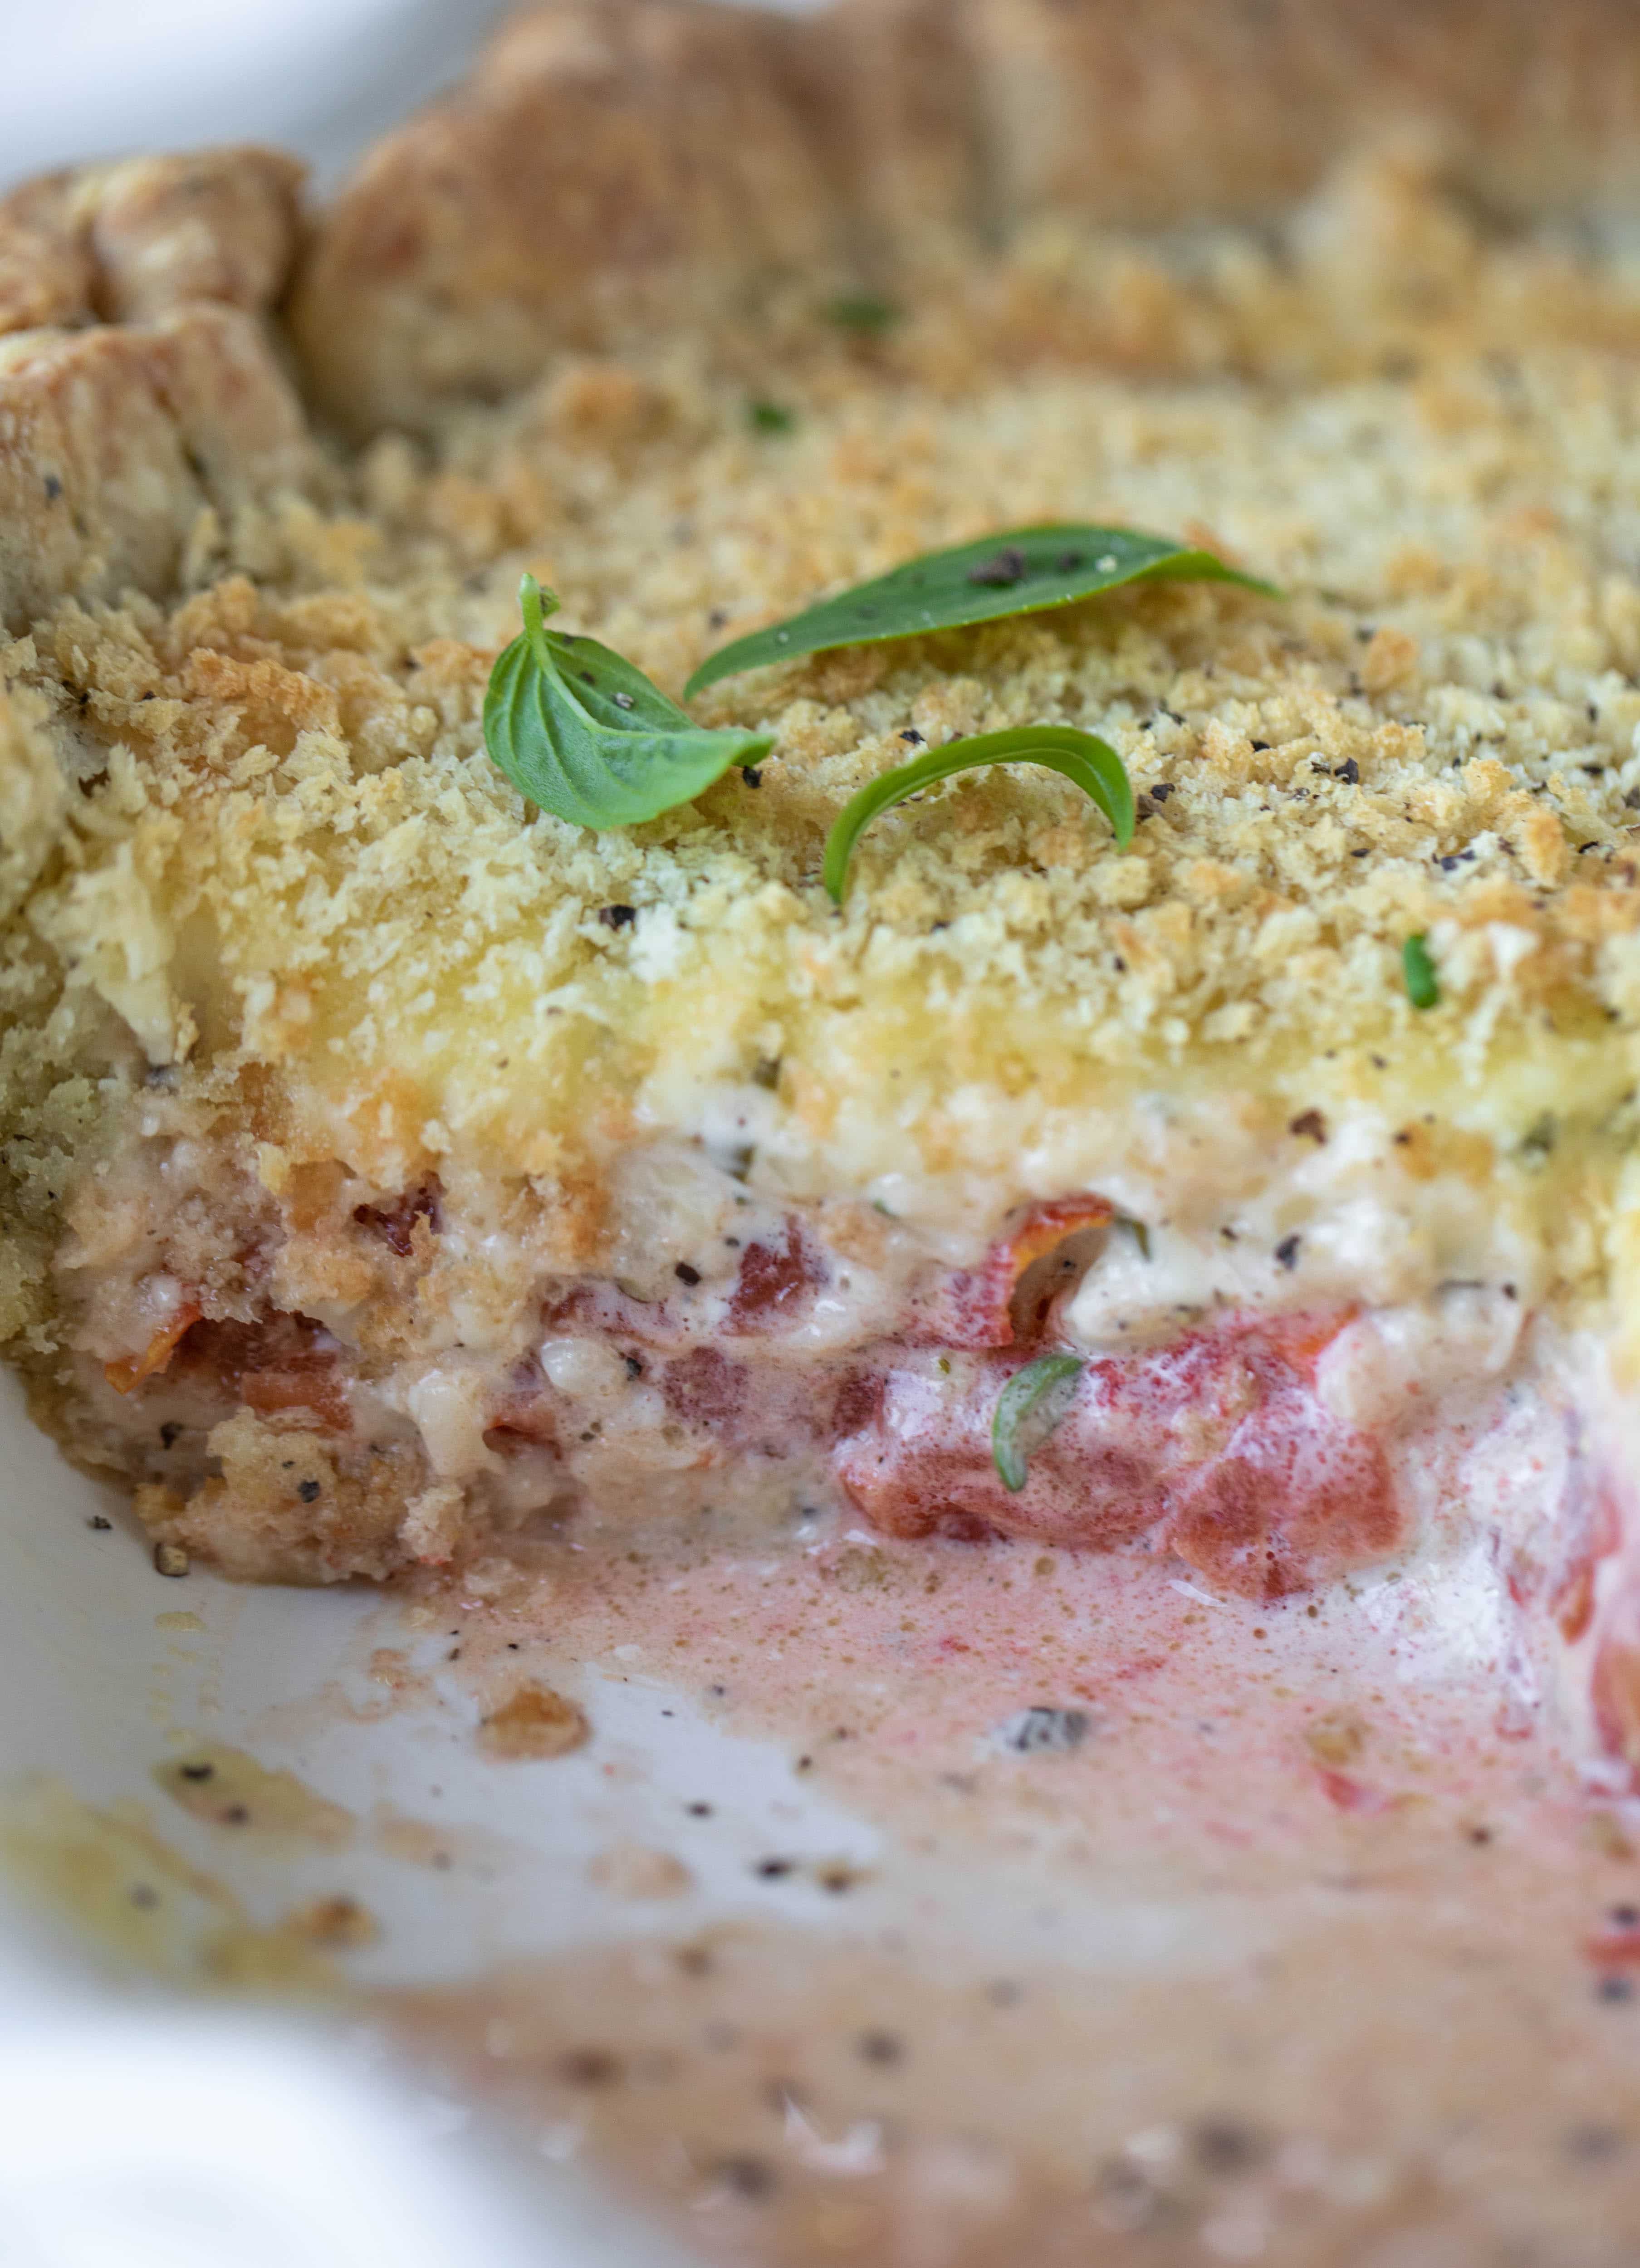 This summer tomato pie is the best dinner ever! Cheddar herb crust, ripe, juicy tomatoes and a cheesy, crunchy layer on top. It's irresistible. 